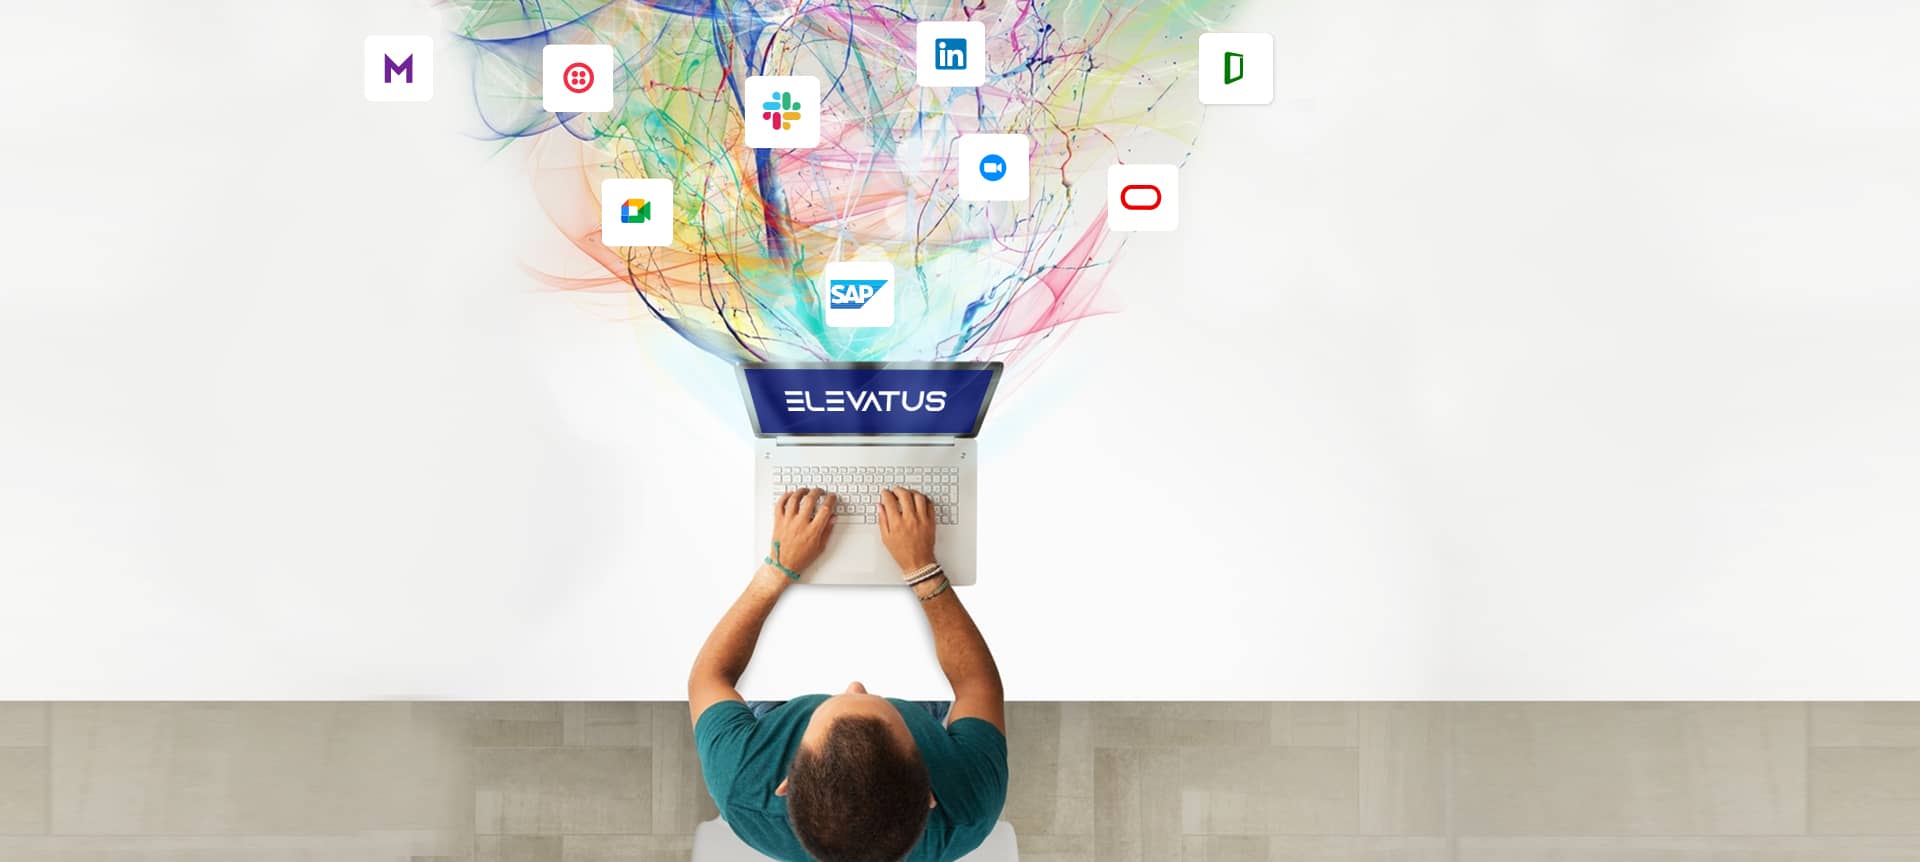 10 Great Integrations That Will Help You Hire Faster with Elevatus’ Hiring Technology